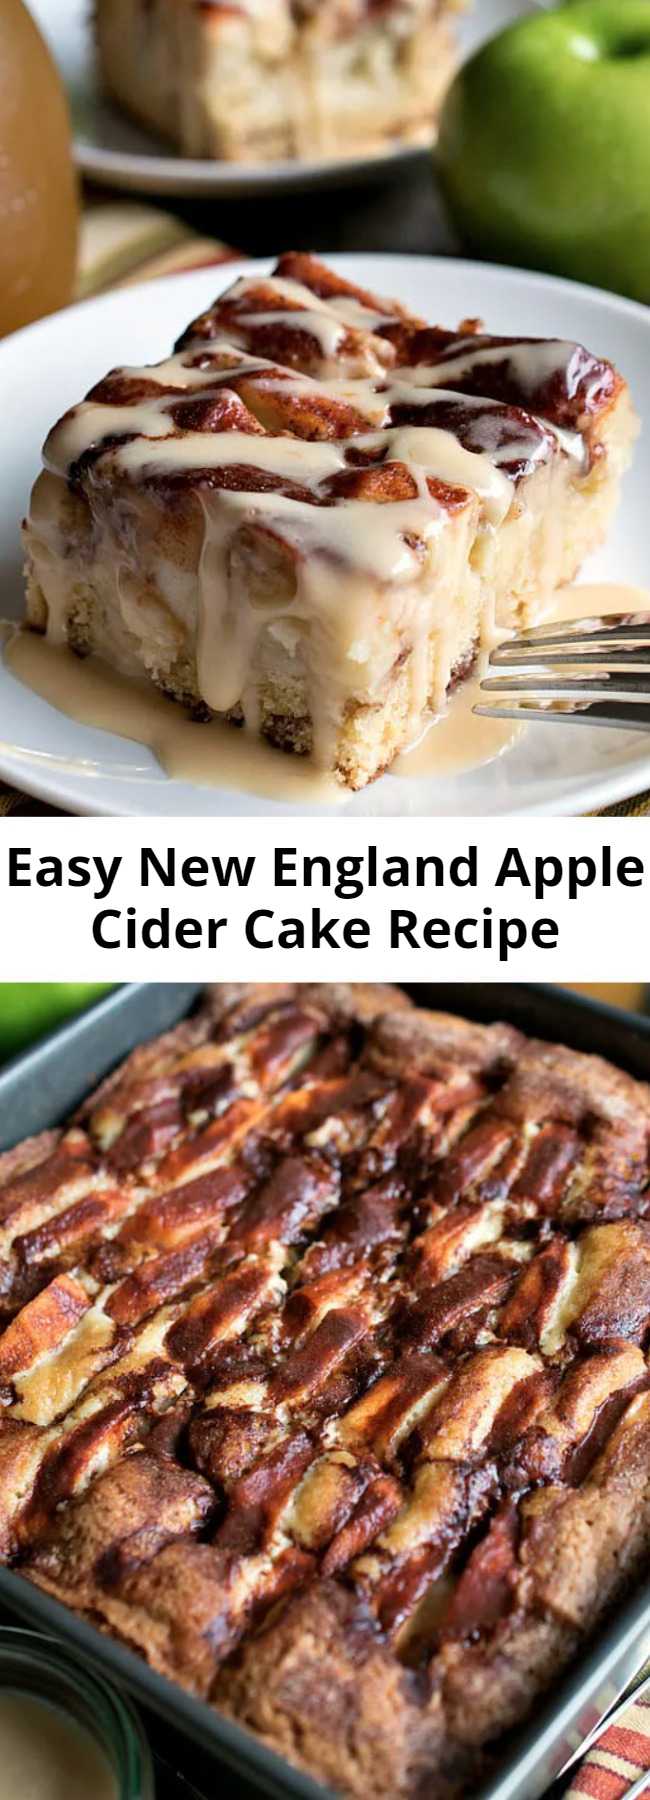 Easy New England Apple Cider Cake Recipe - Very delicious... chock full of sliced Granny Smith apples in a simple, sweet cake that gets great flavor and moisture from cinnamon, heavy cream and apple cider! This cake also has a delicious, creamy apple cider glaze that gets drizzled over the top when served!